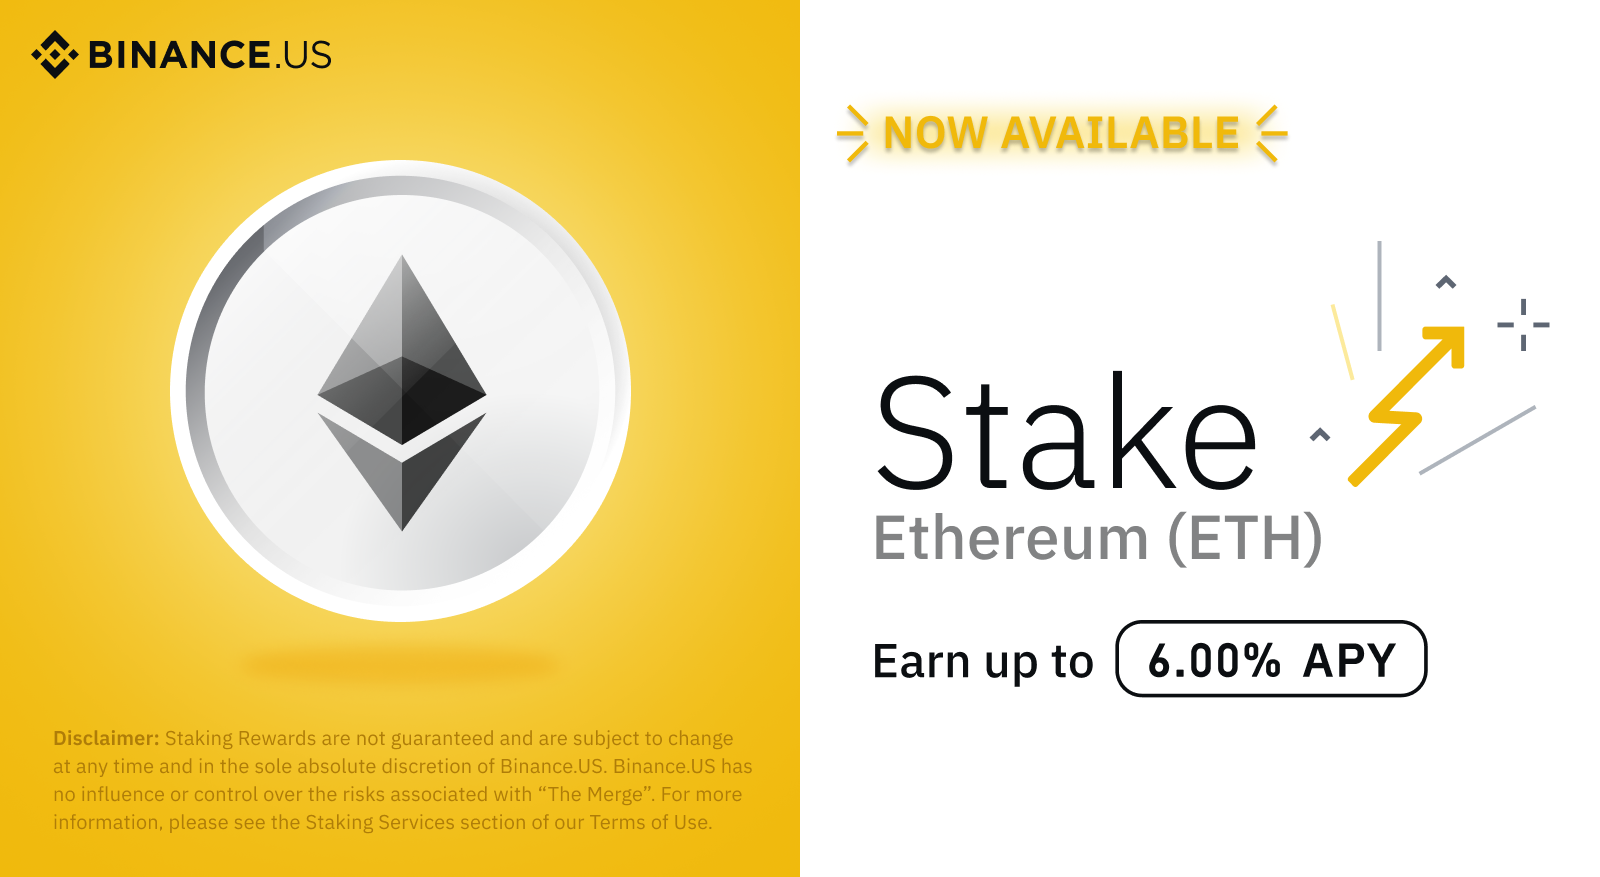 Binance.US Launches Ethereum Staking with a 6% APY Ahead of “The Merge”